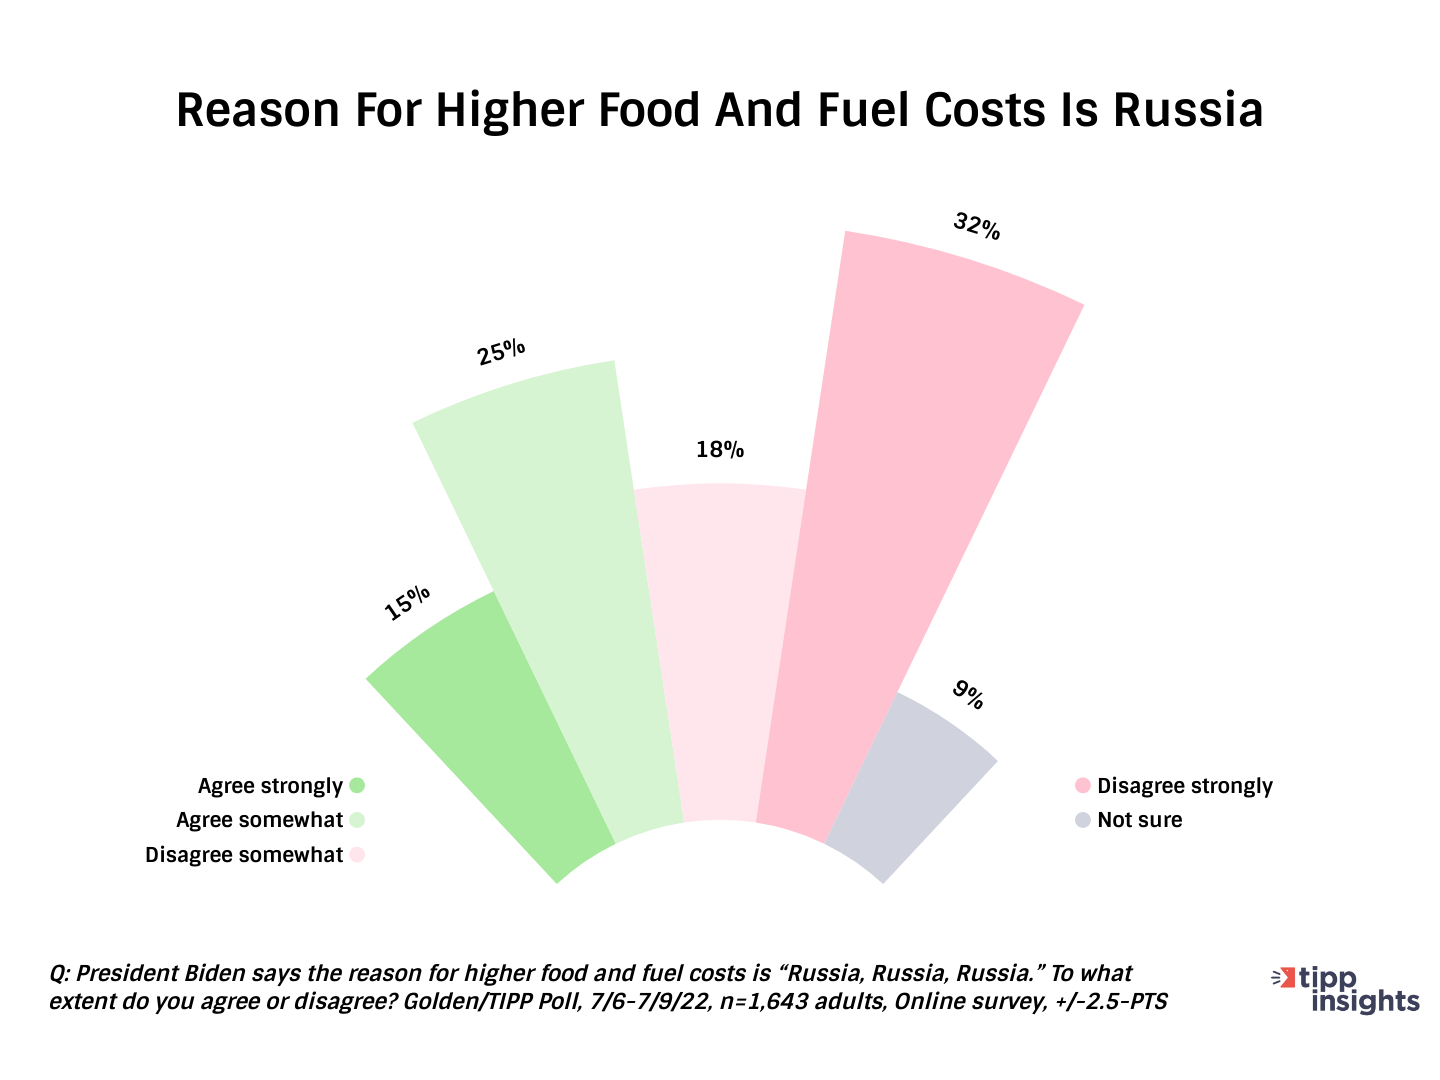 Golden/TIPP Poll Results: Do Americans think the Russia-Ukraine war is the reason for higher food and fuel costs 